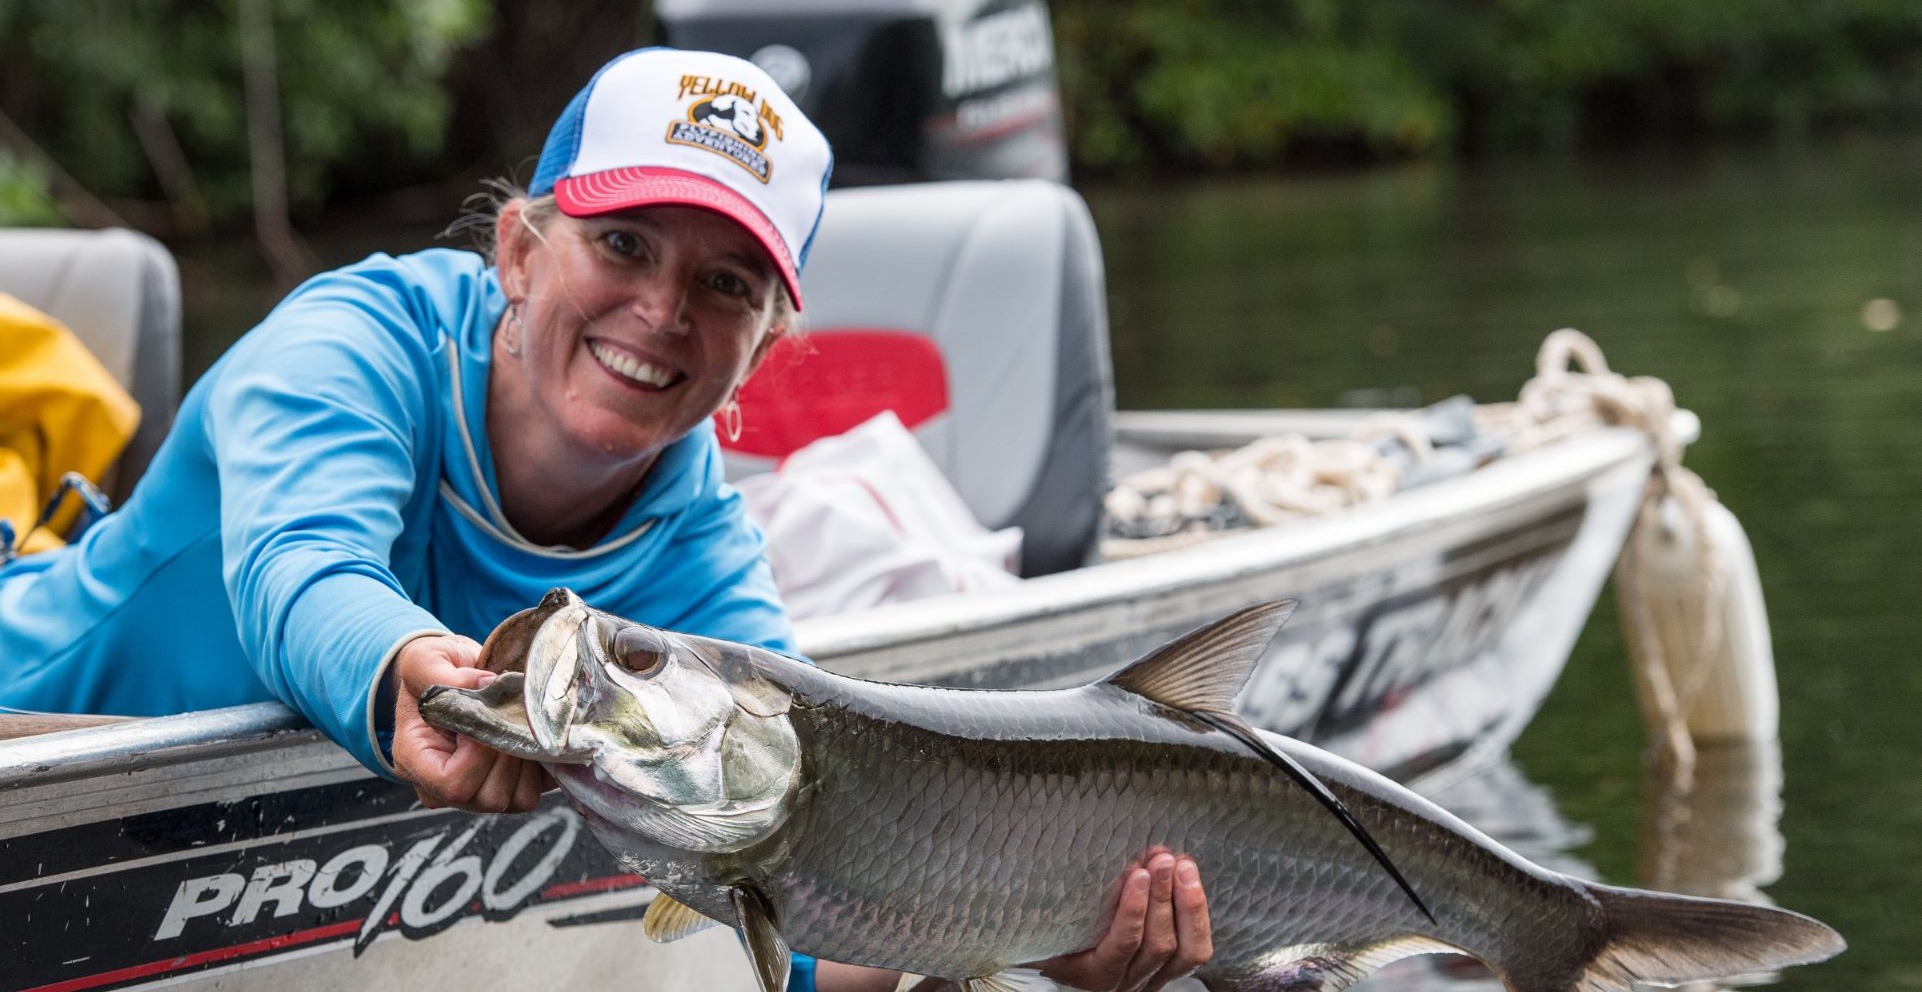 Shop Women's Fly Fishing Clothing and Apparel